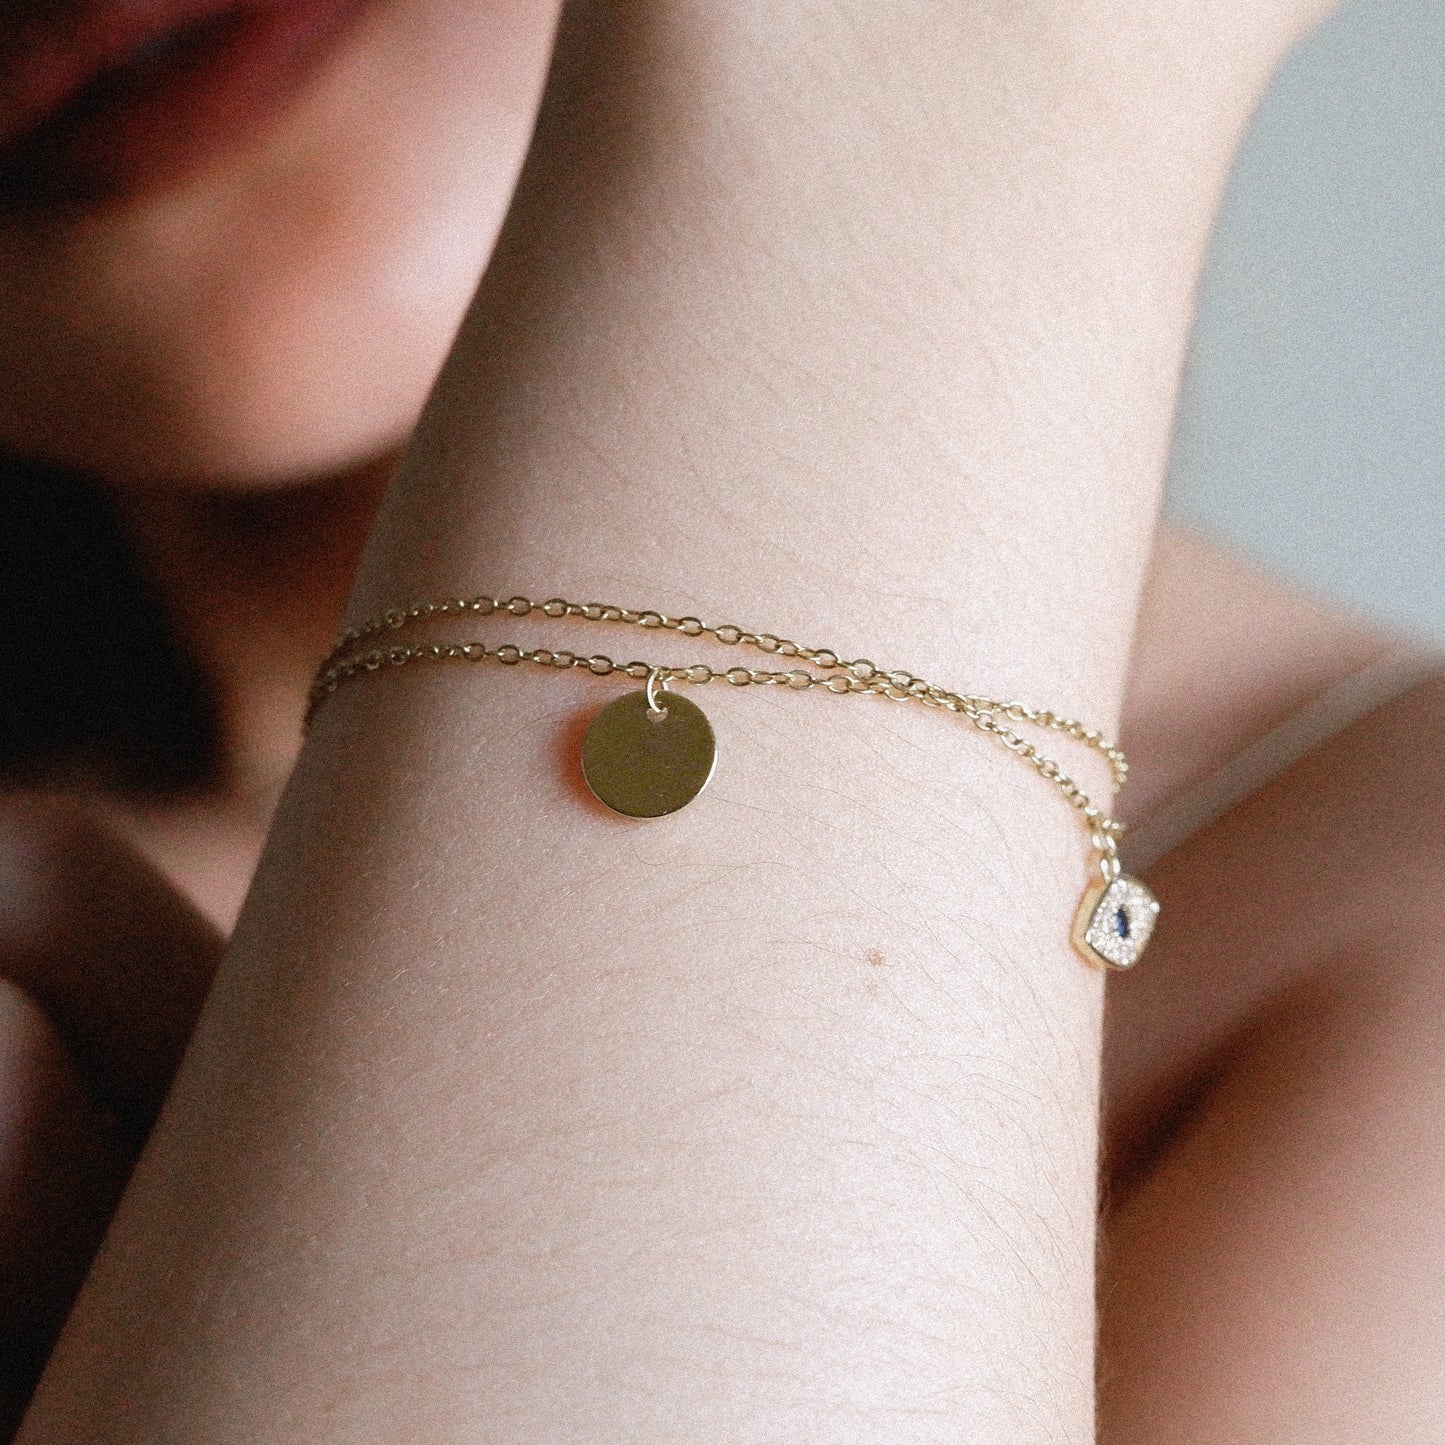 The Tiny Disc Bracelet and Anklet